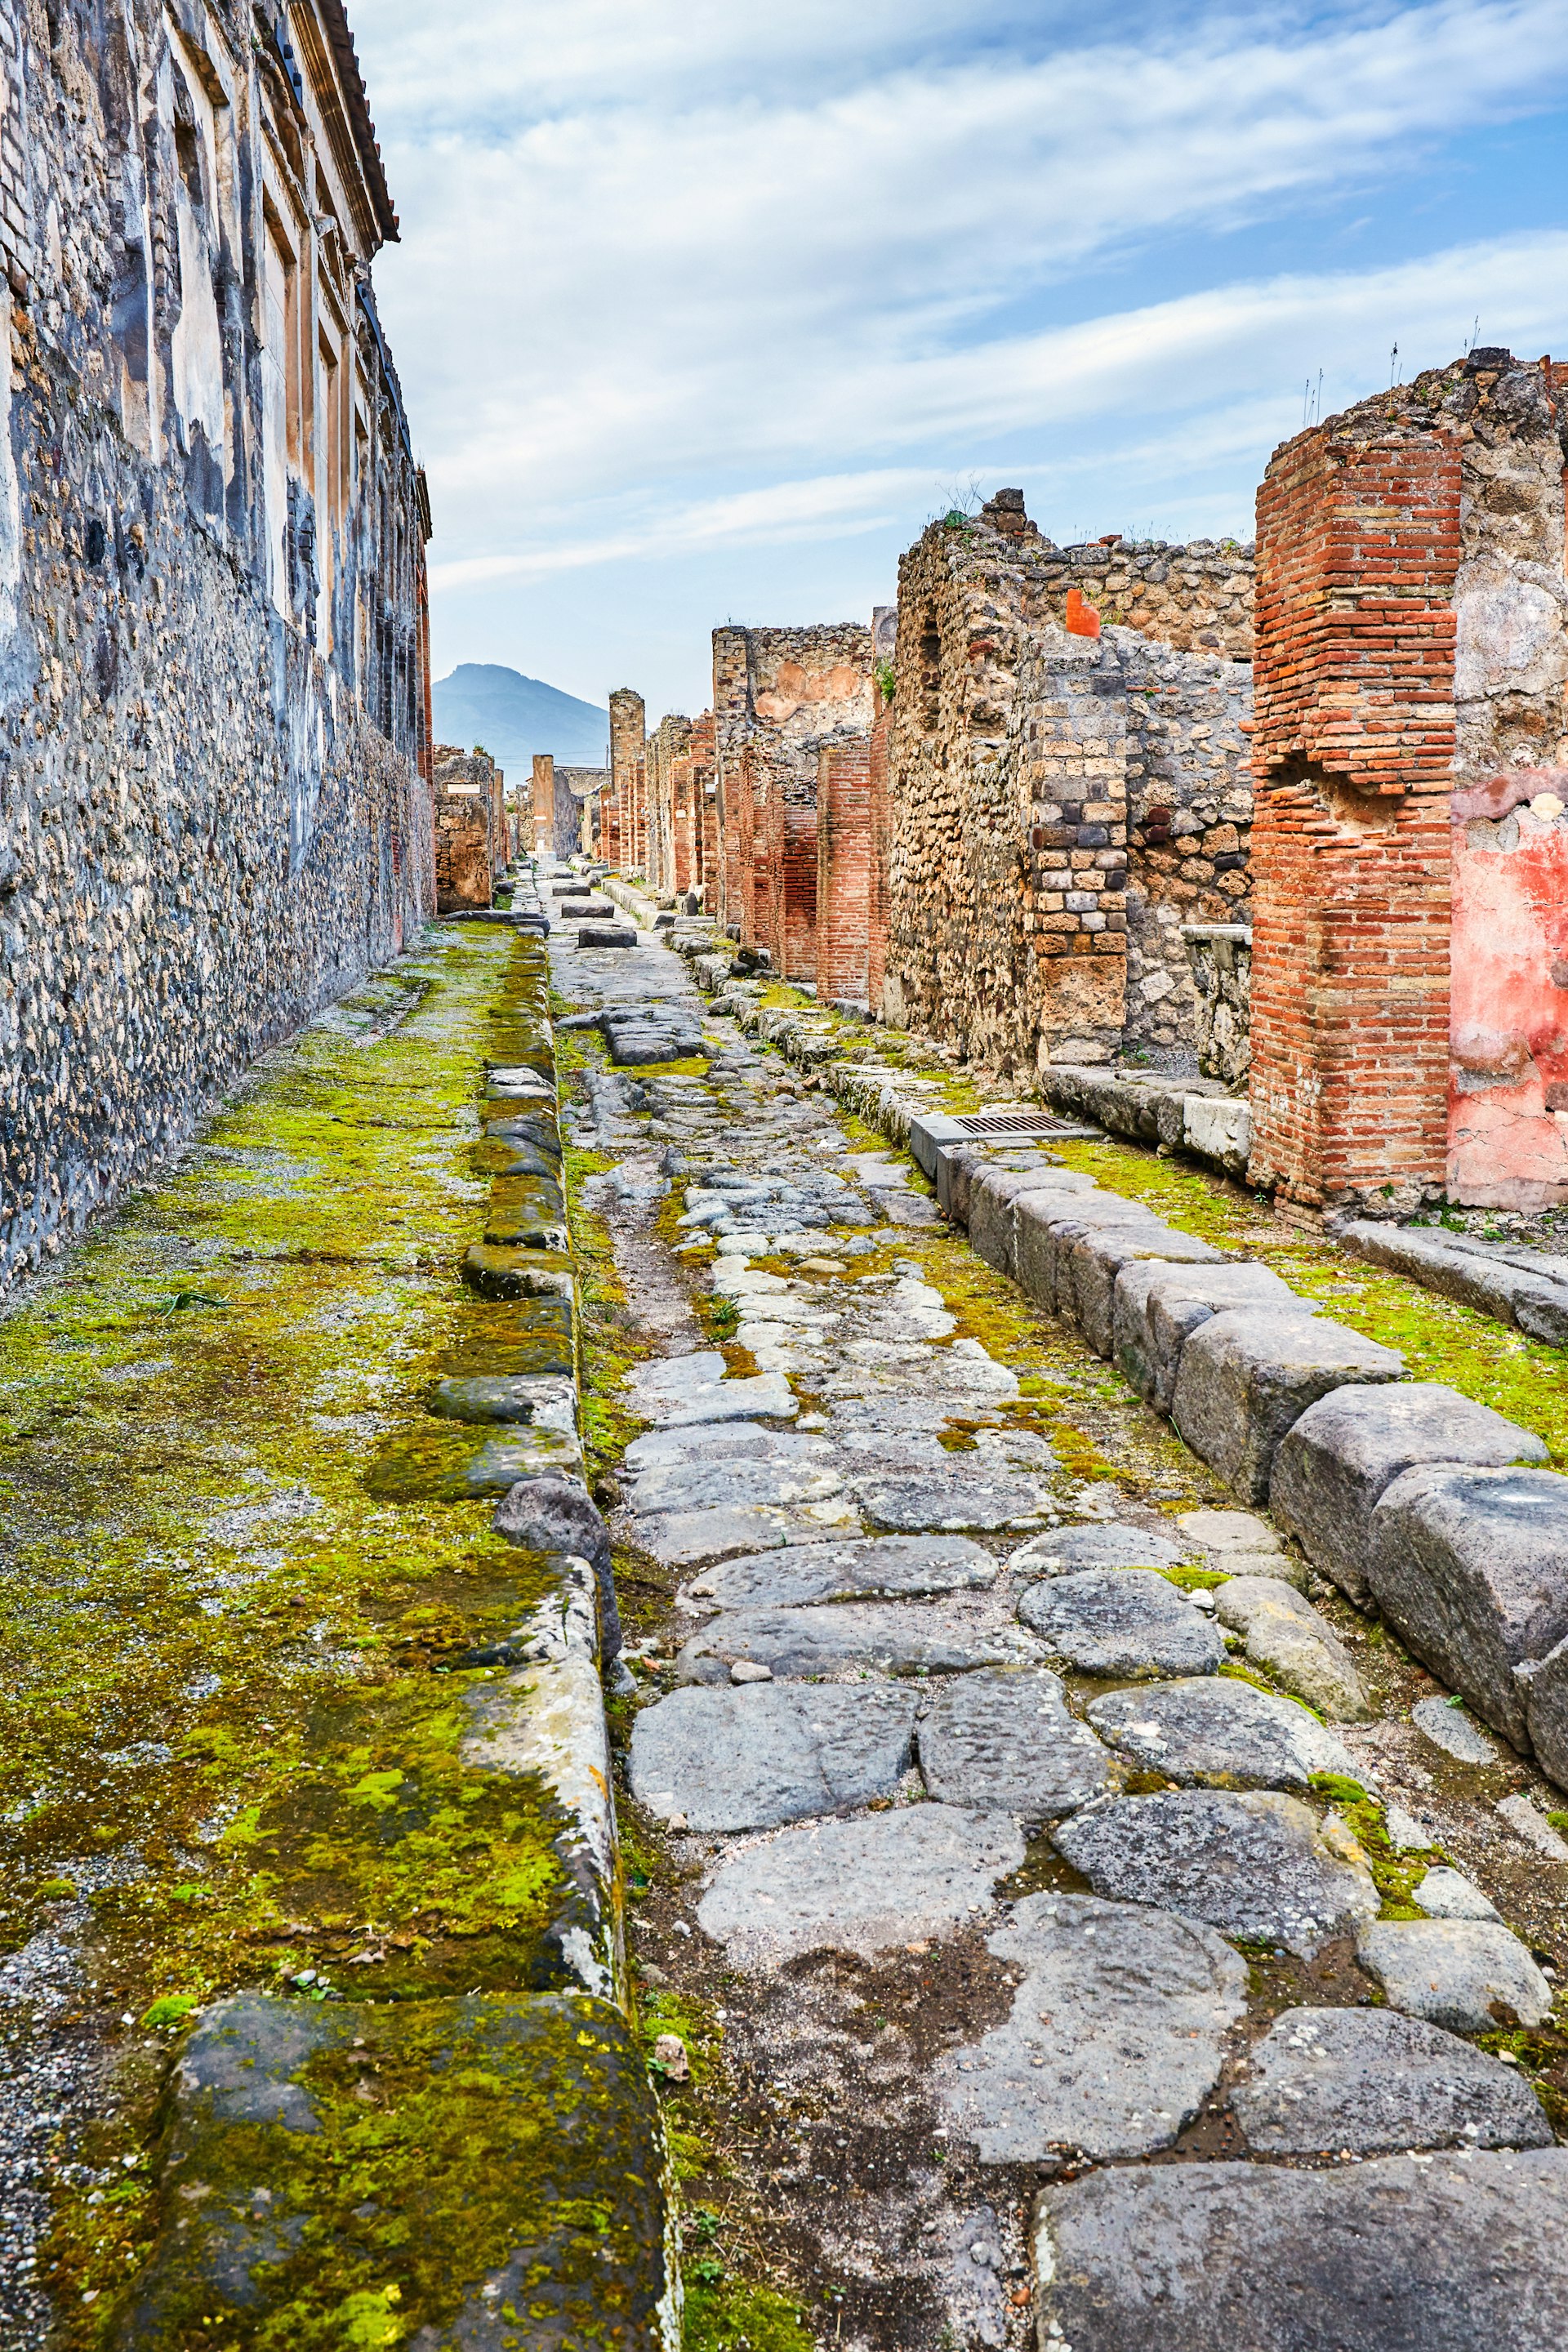 Empty street through the ruins of the ancient city of Pompeii, Italy